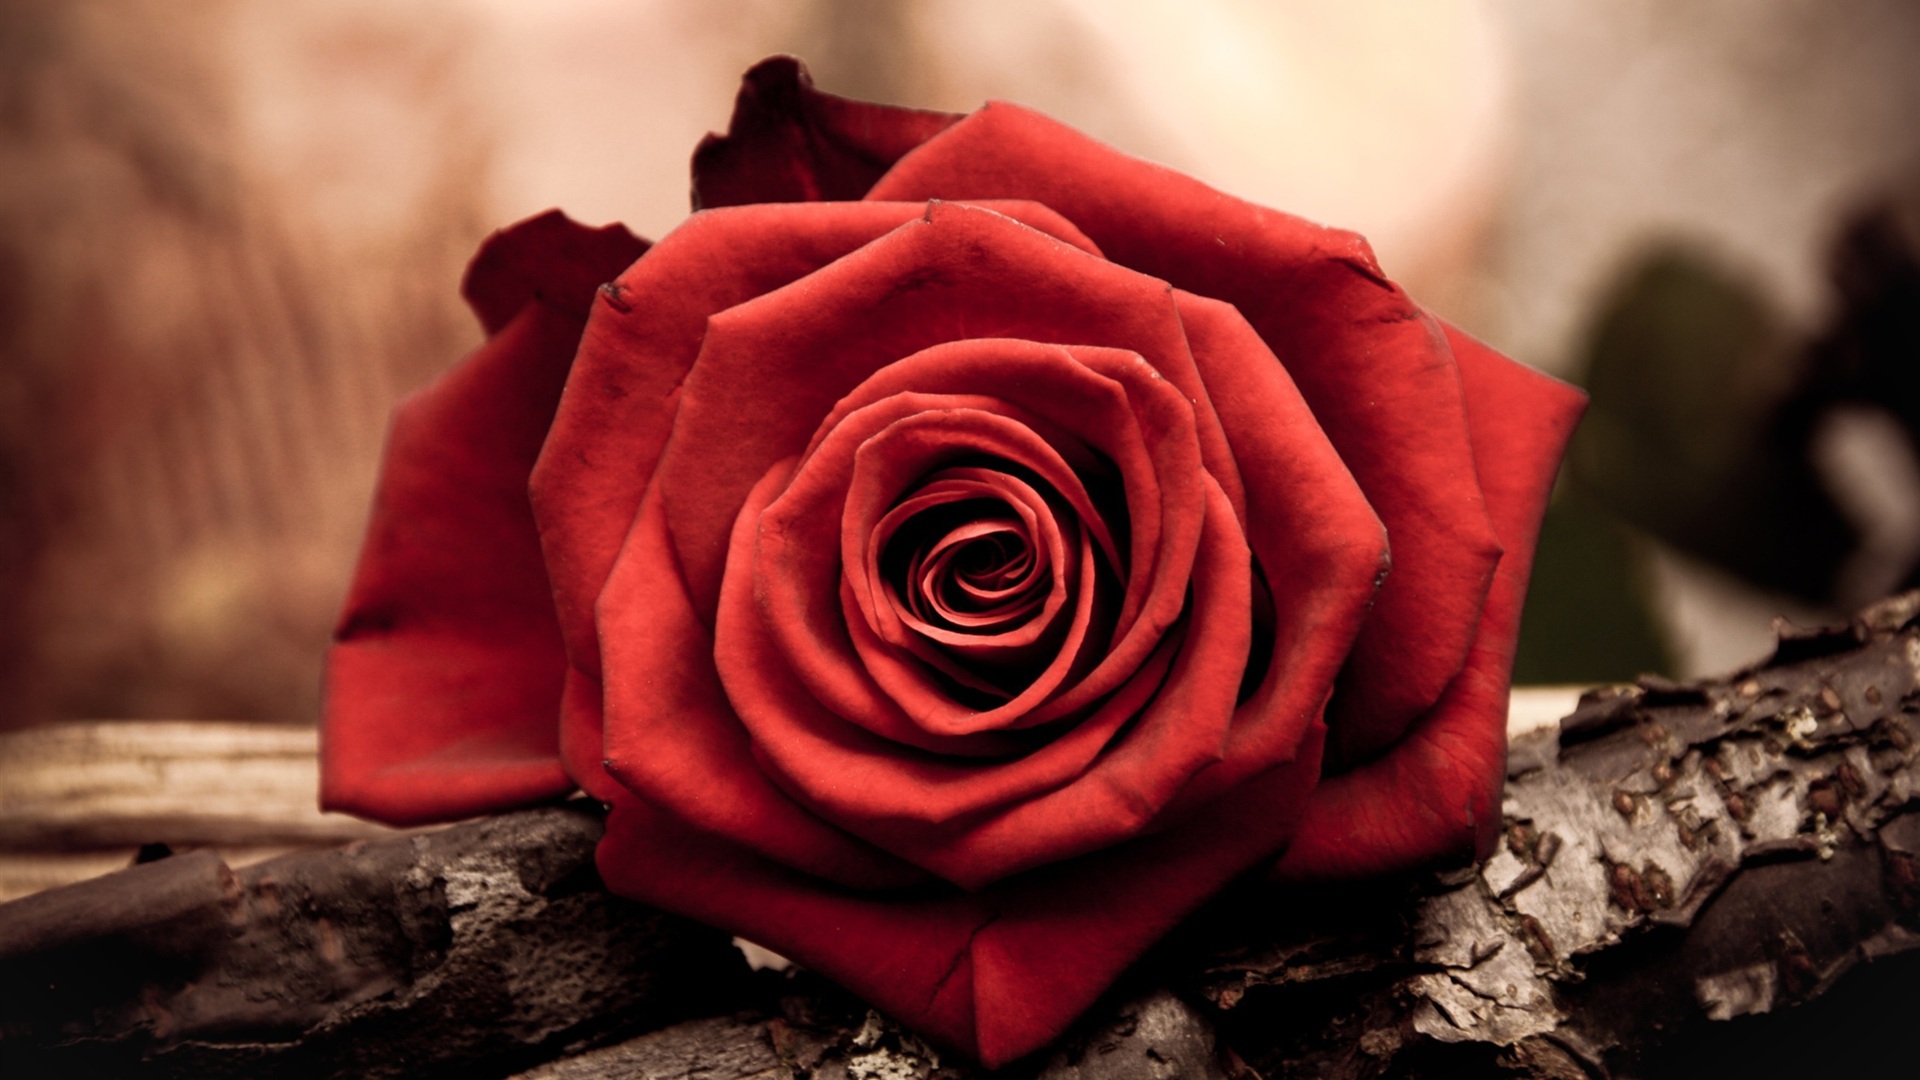 Red Roses 4k Background Wallpaperss Free Hd Most Beautiful